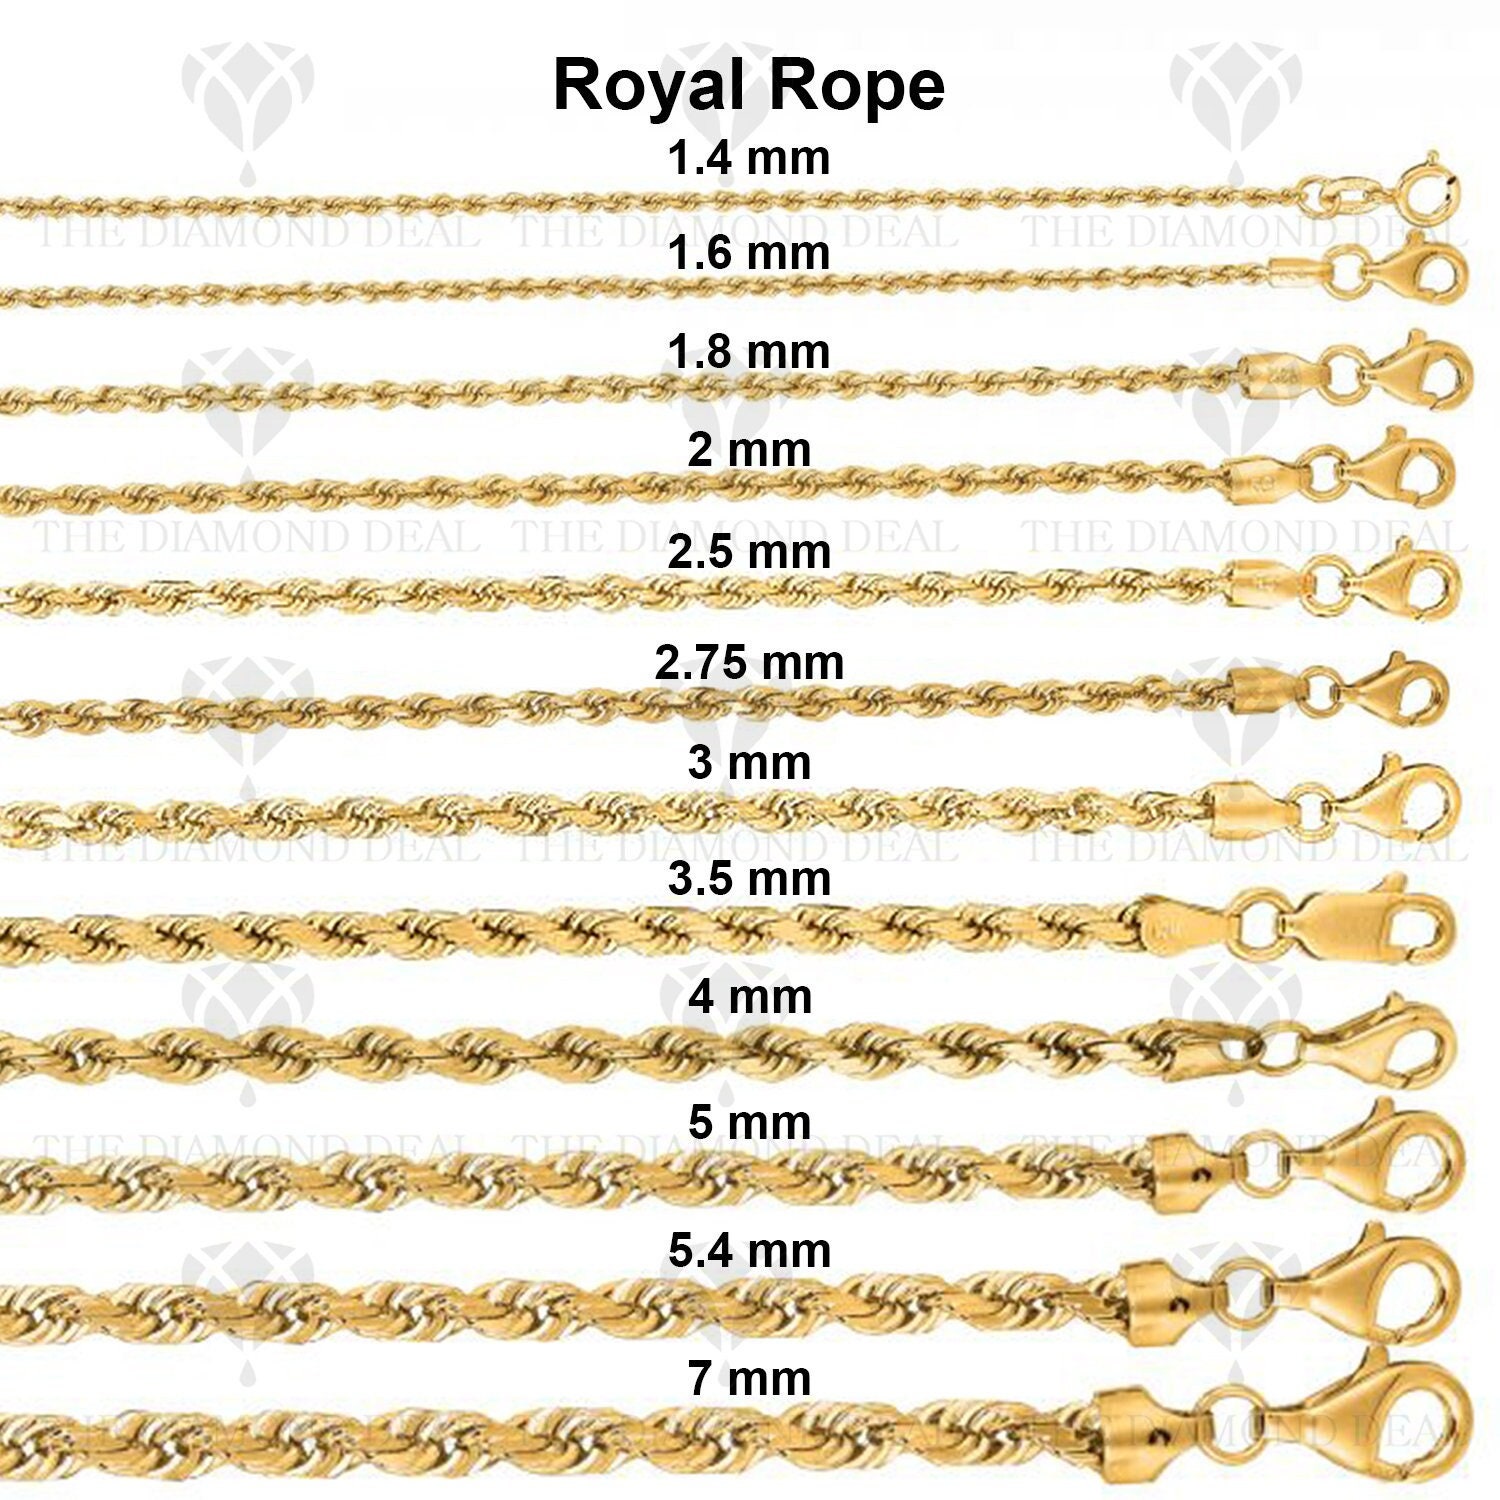 Rope Chain Mm Size Chart | Hot Sex Picture